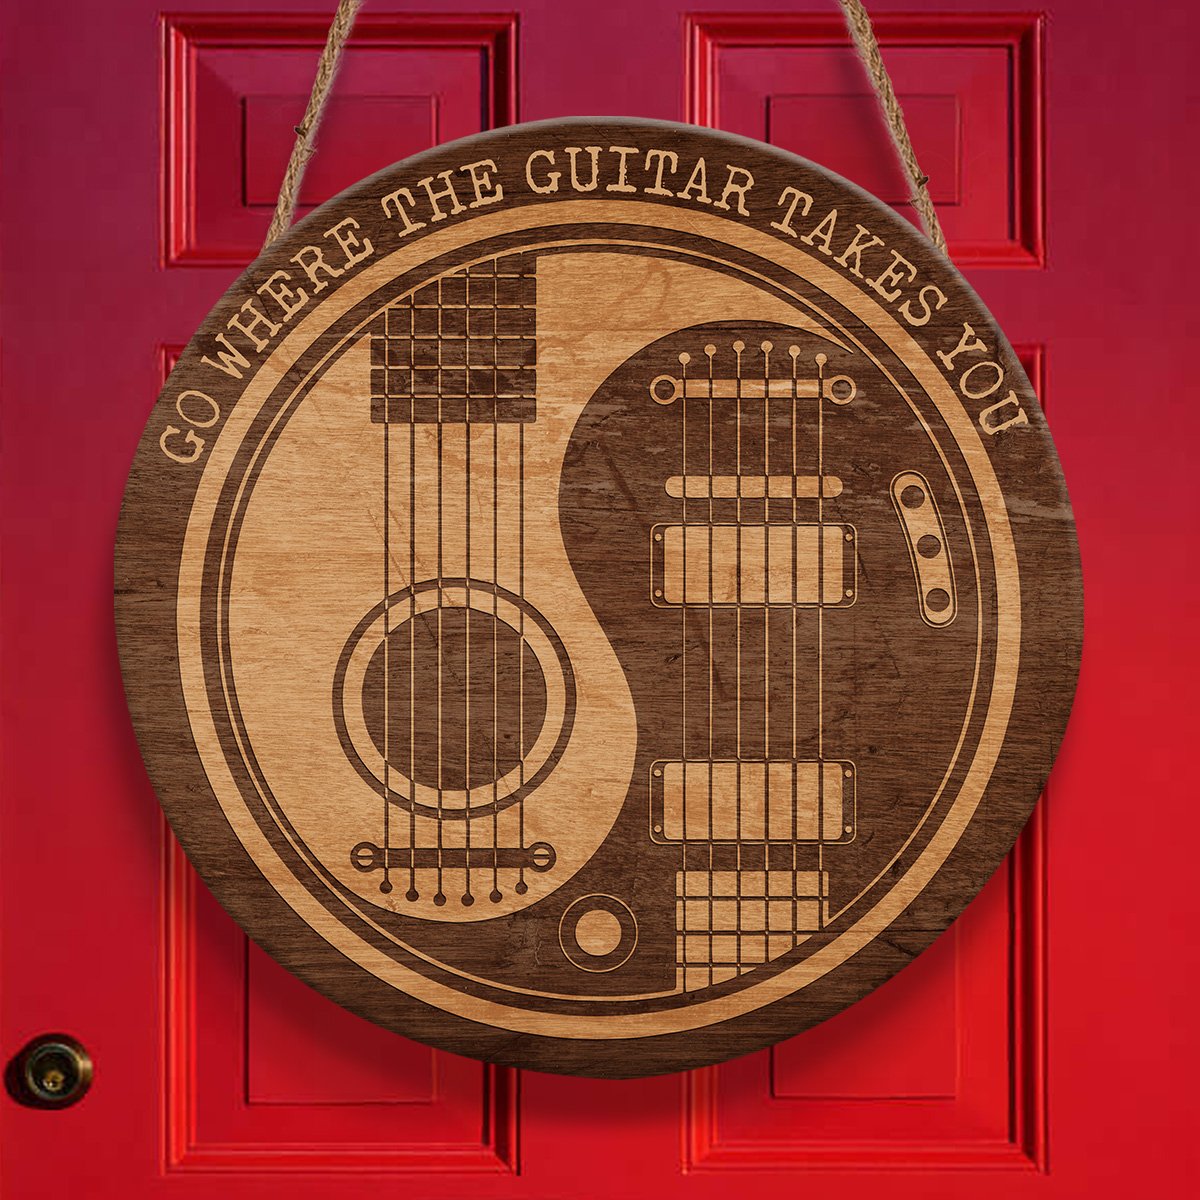 Go Where The Guitar Takes You Personalizedwitch Round Wood Sign Outdoor Decor